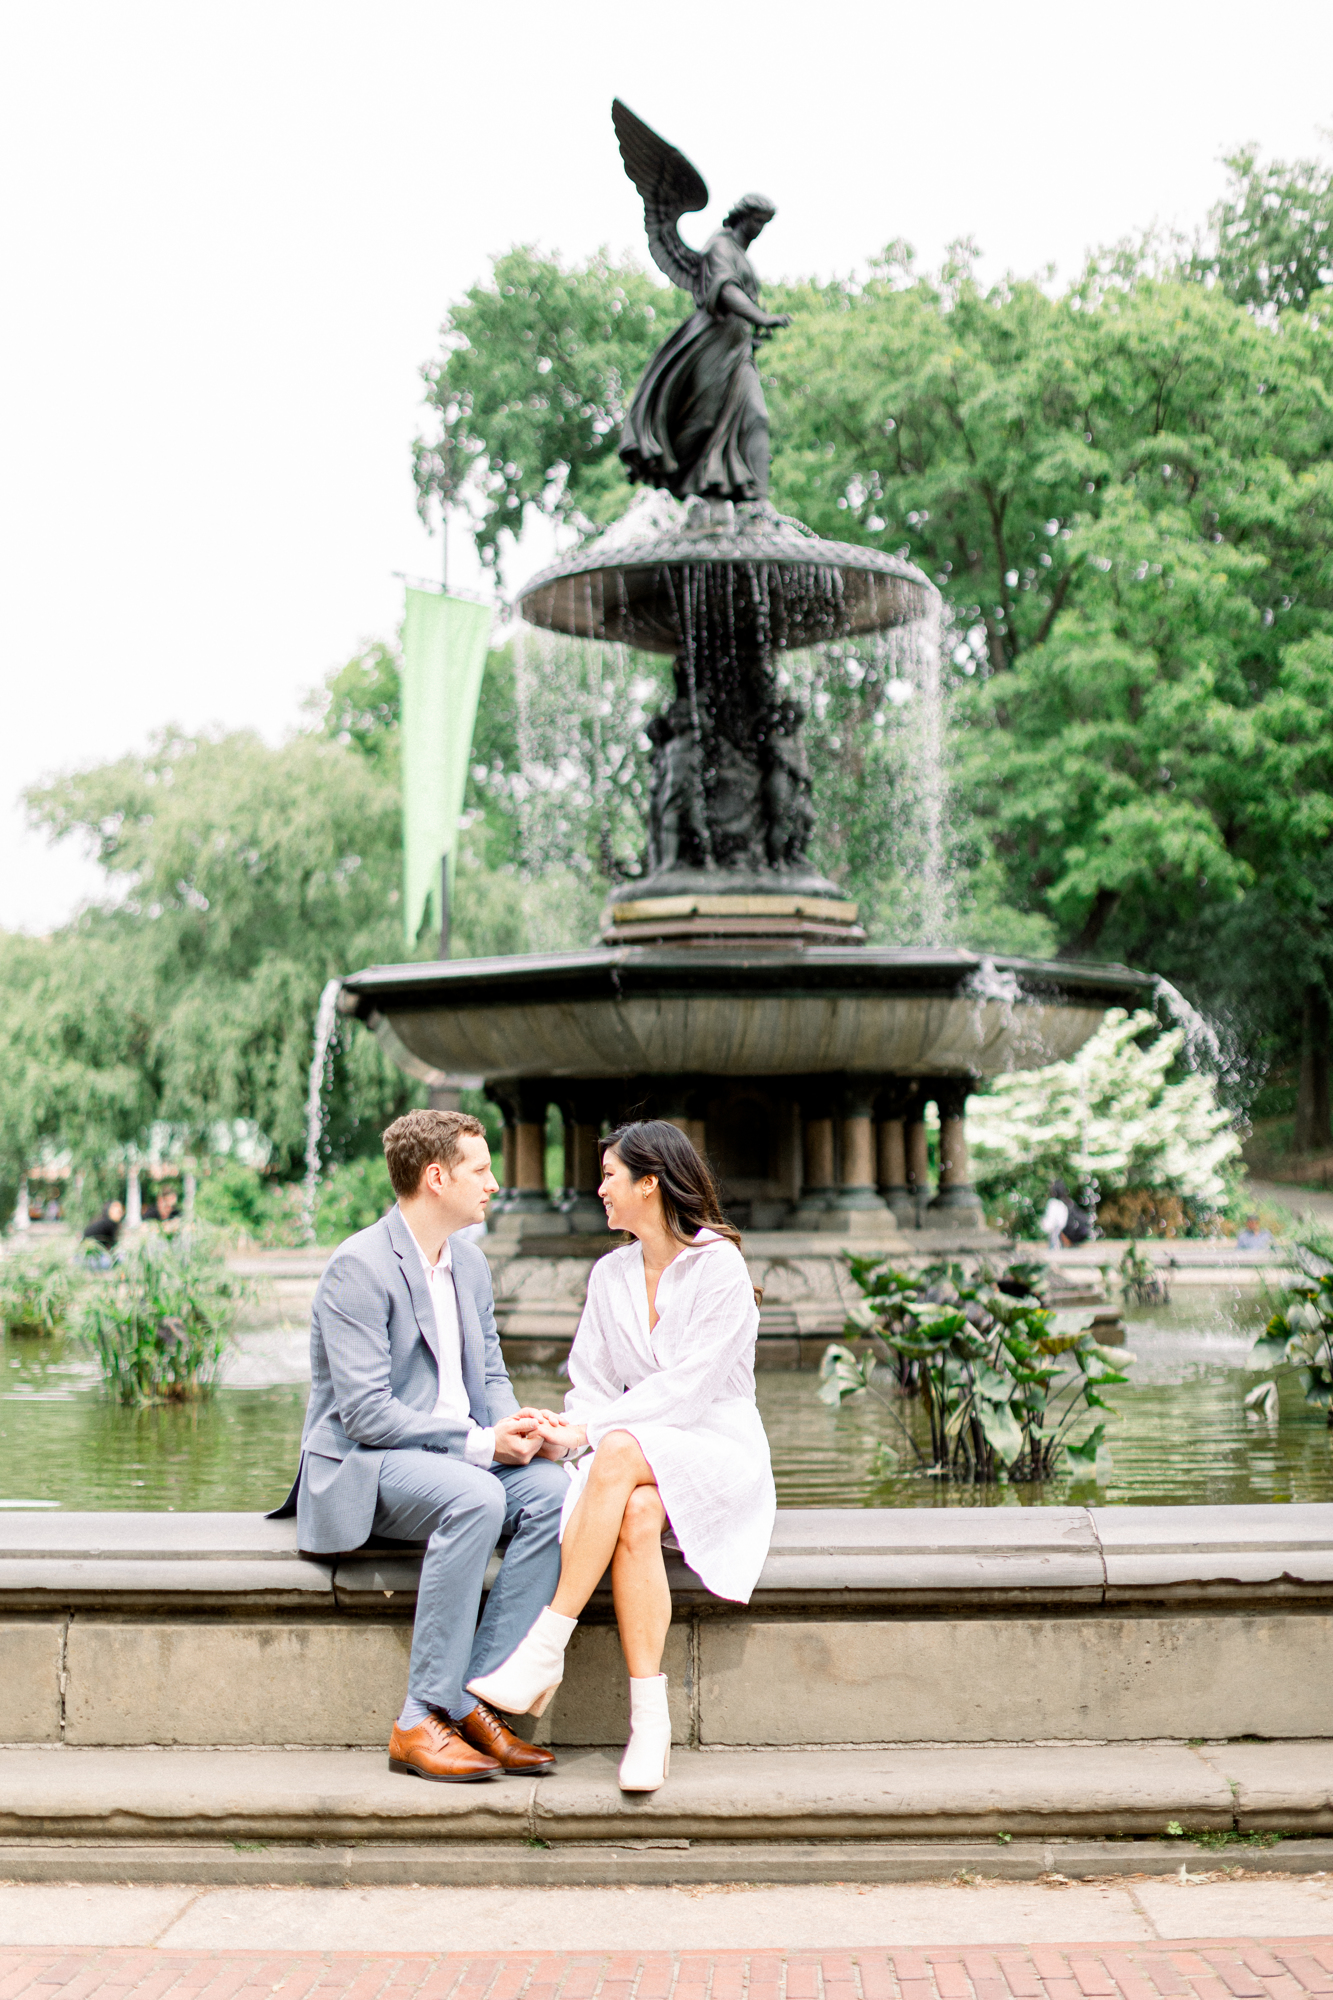 NYC Central Park Iconic Bethesda Fountain Photograph. 